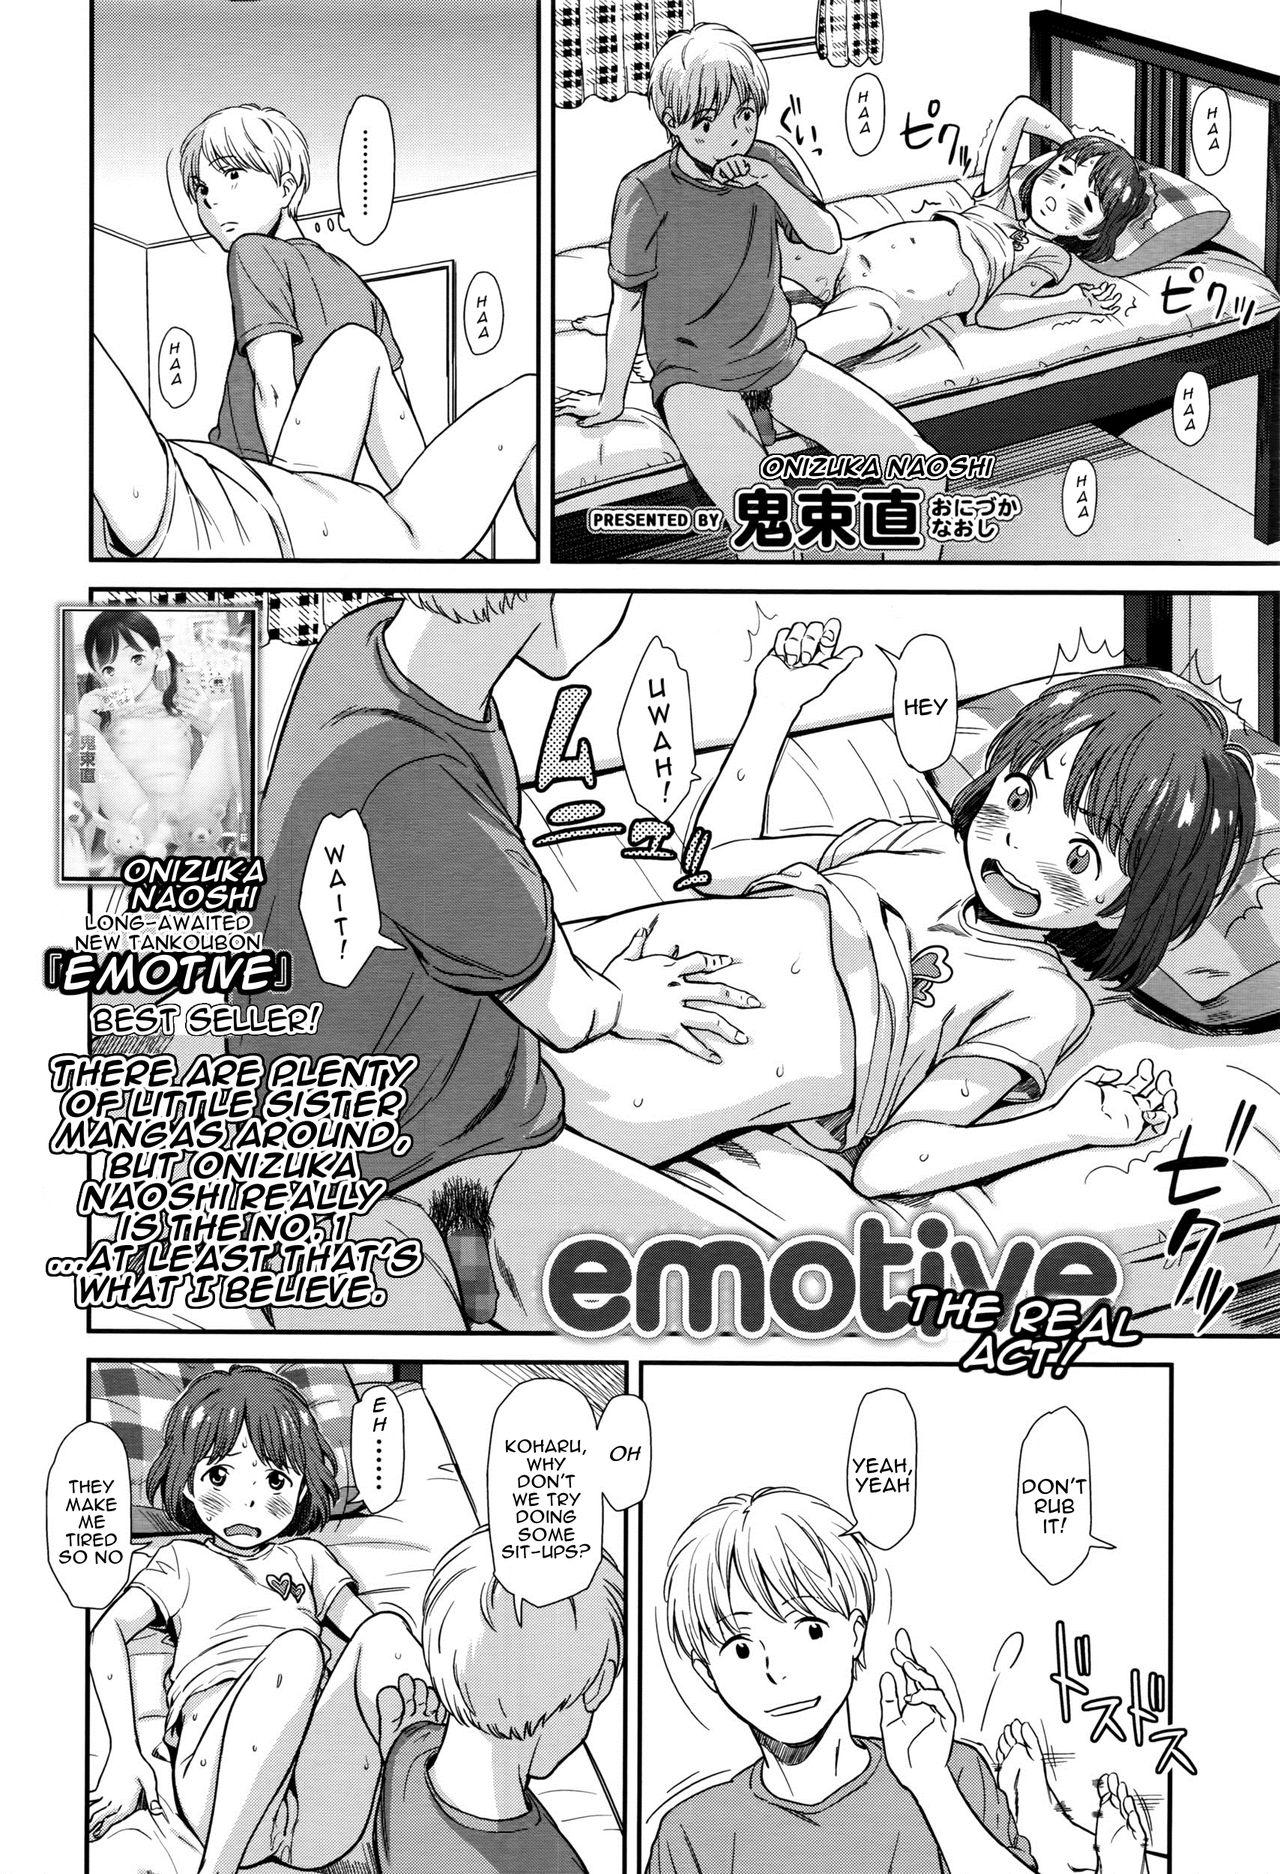 Chubby emotive Honban! | emotive The Real Act! All - Page 2